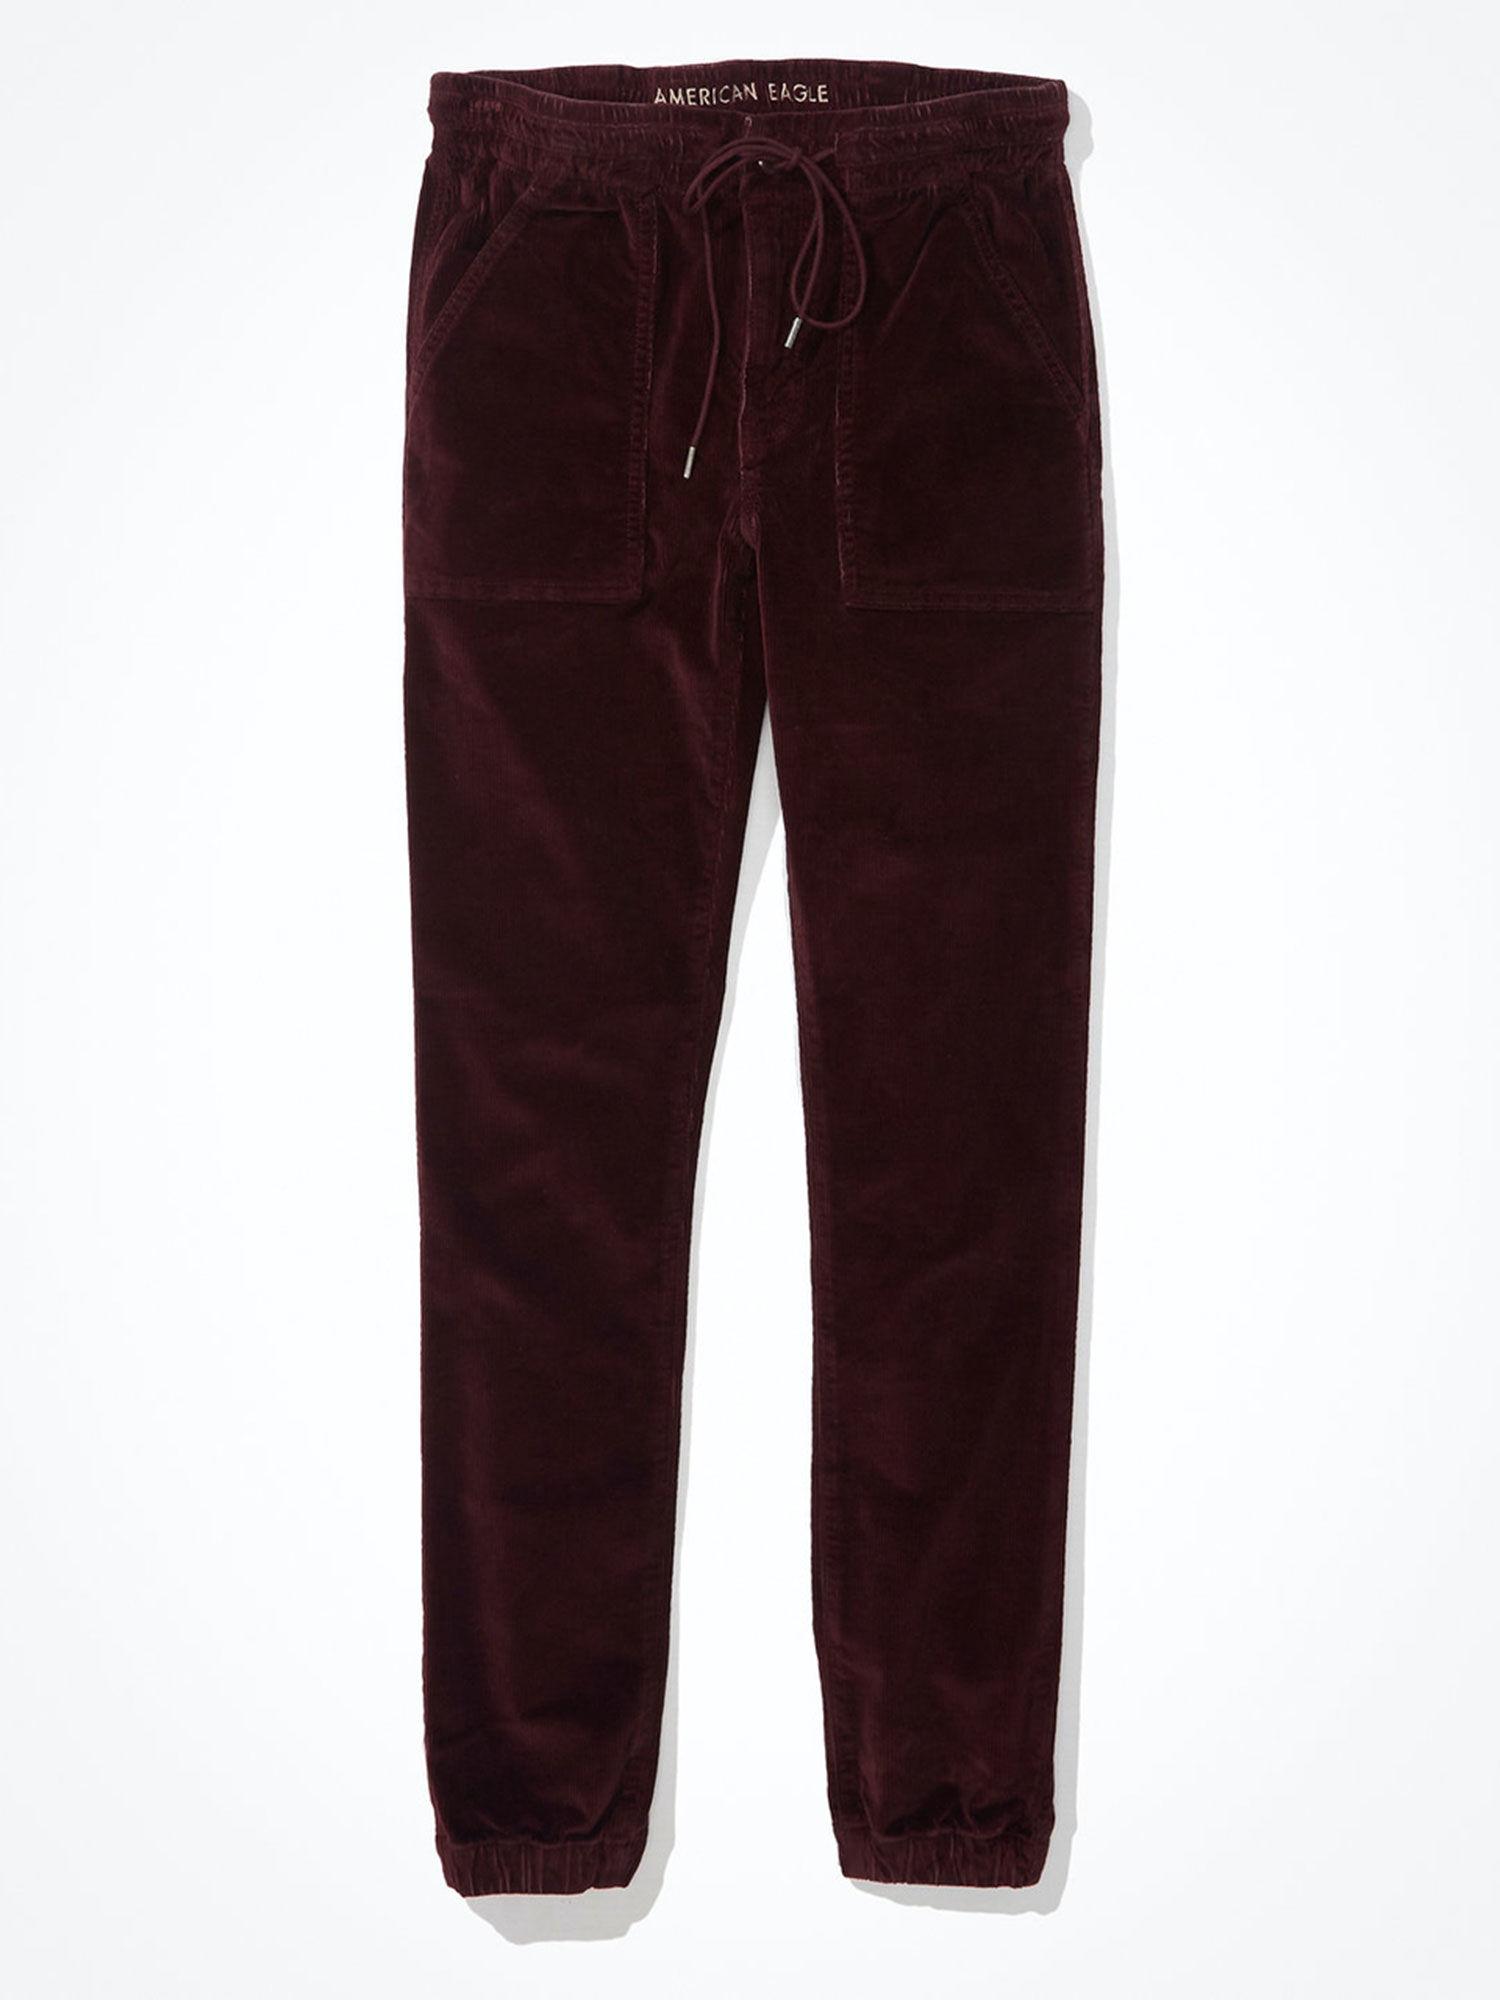 burgundy solid joggers